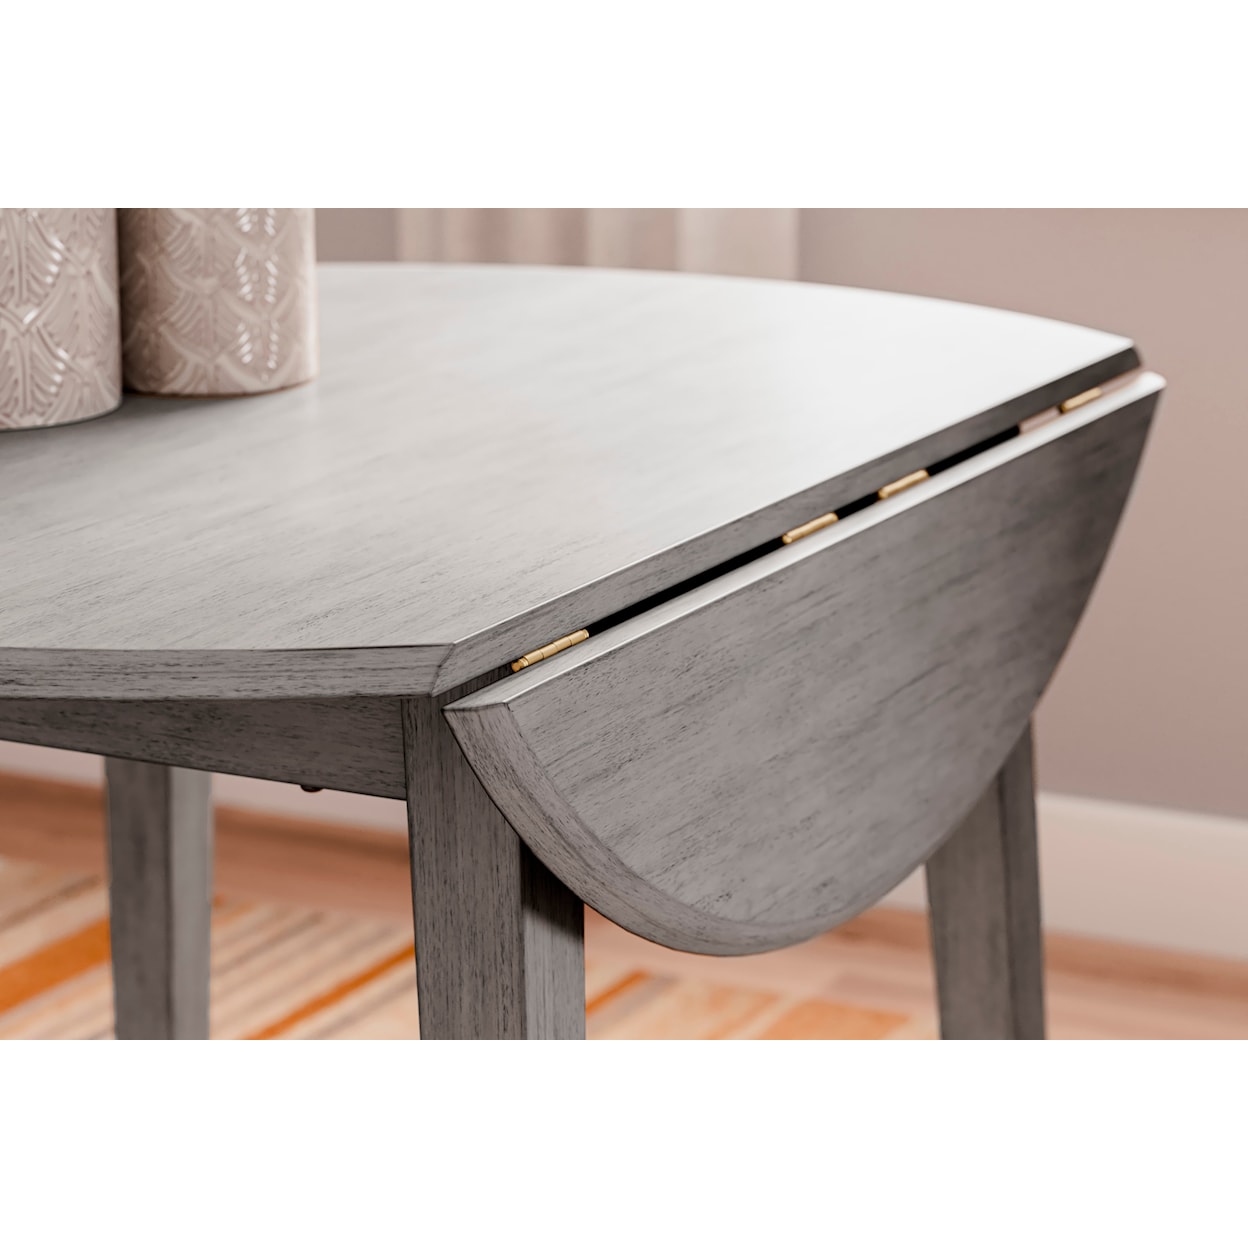 Signature Design by Ashley Shullden Drop Leaf Dining Table